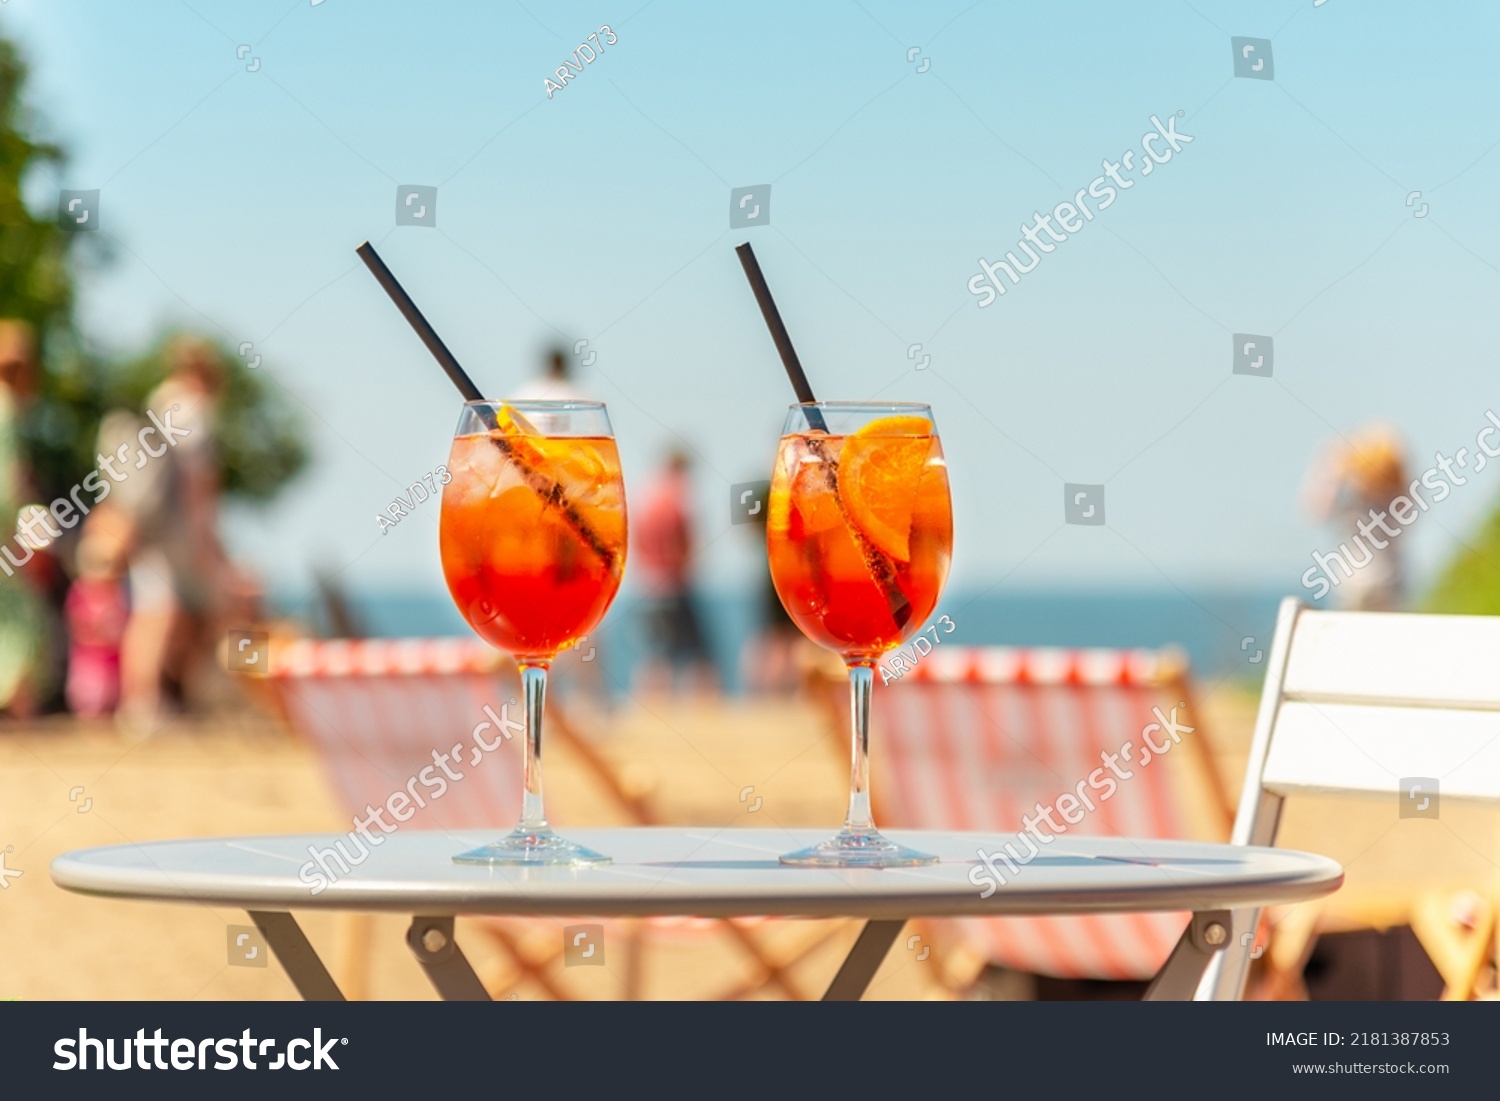 Two glasses of orange spritz aperol drink cocktail on table outdoors with sea and trees view blurred people background. #2181387853